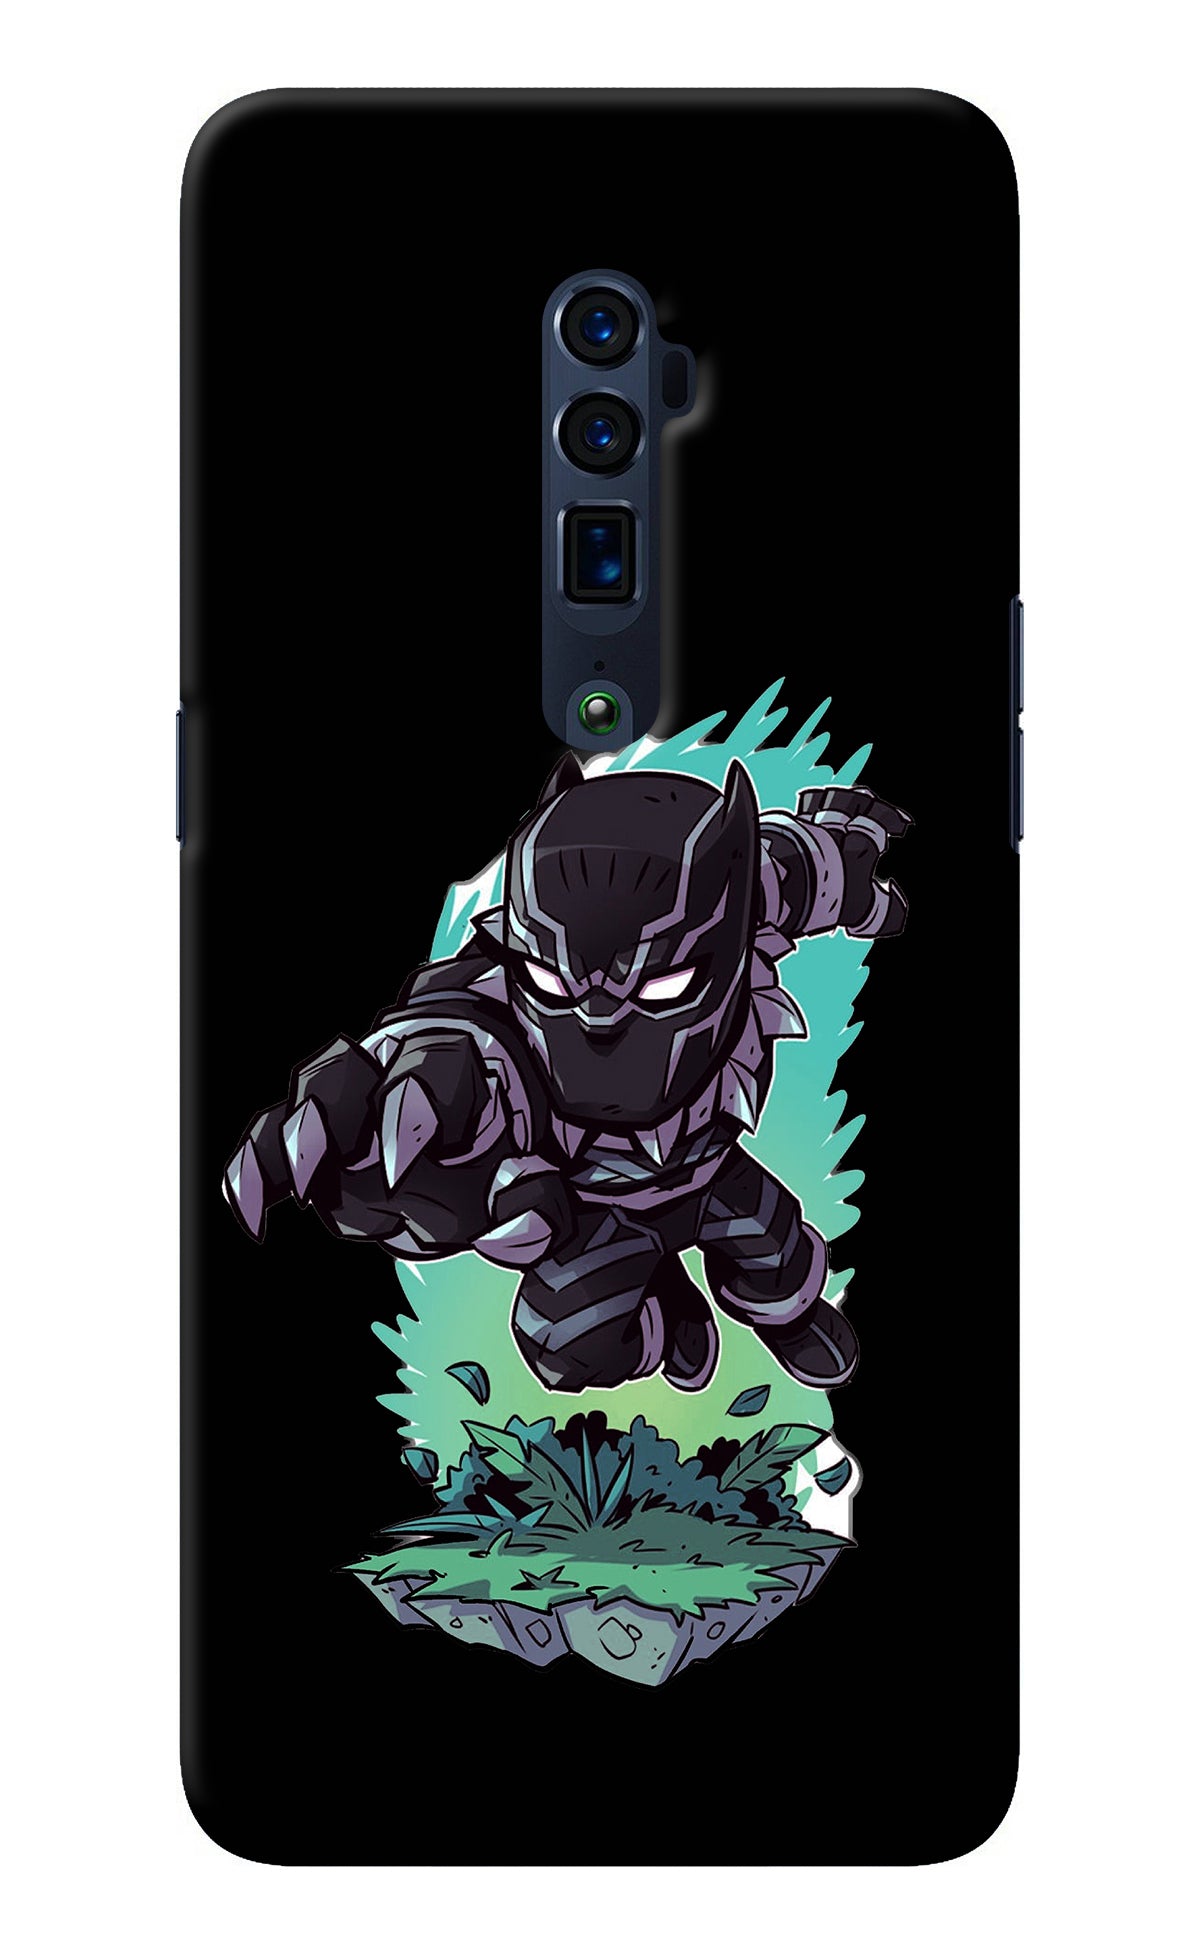 Black Panther Oppo Reno 10x Zoom Back Cover